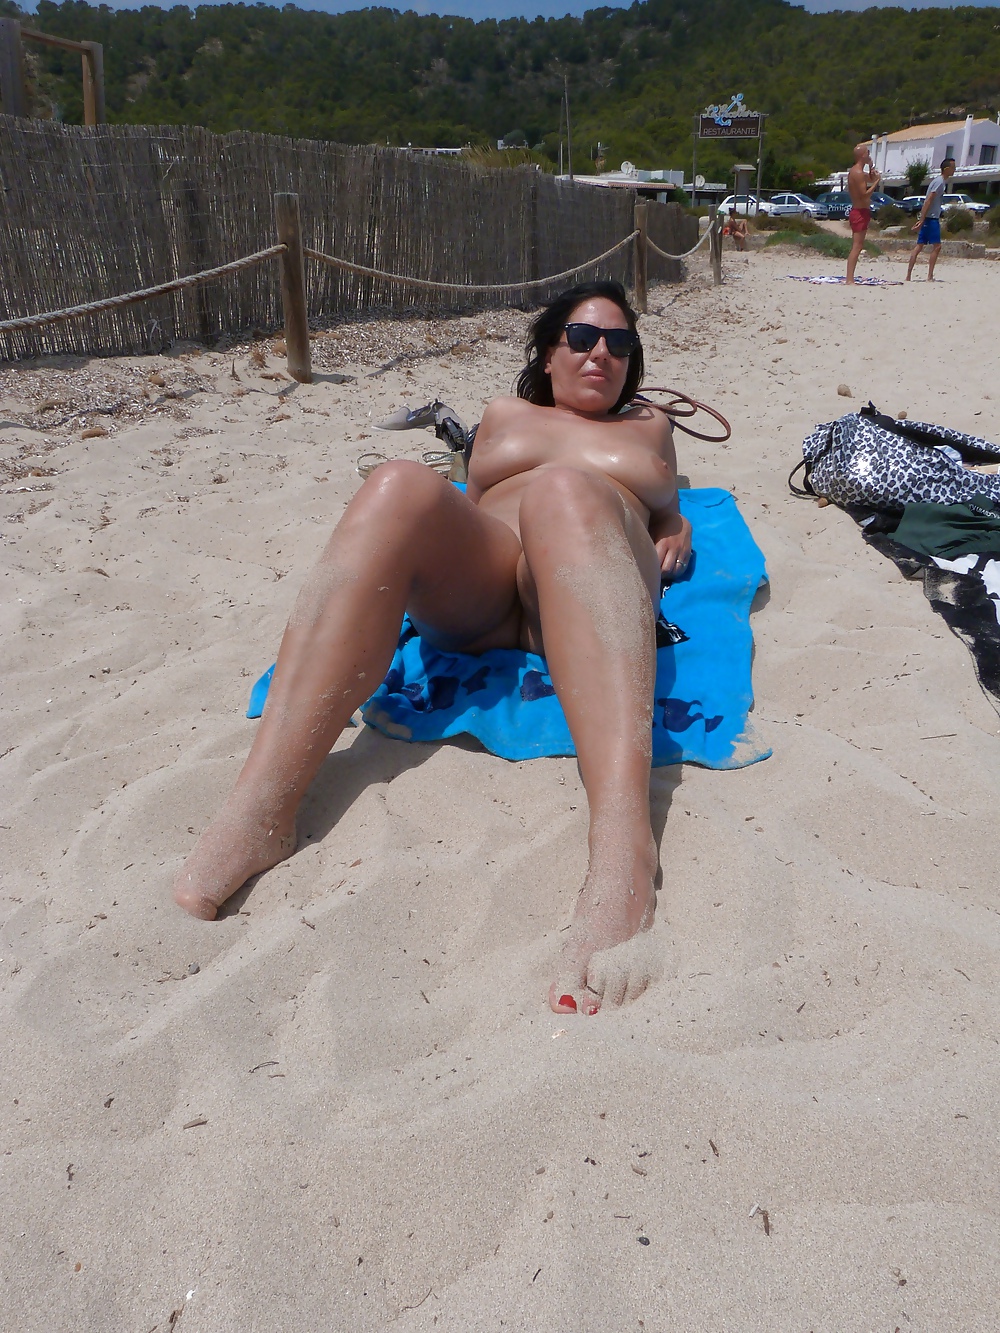 Me naked at the nudist beach #12676396